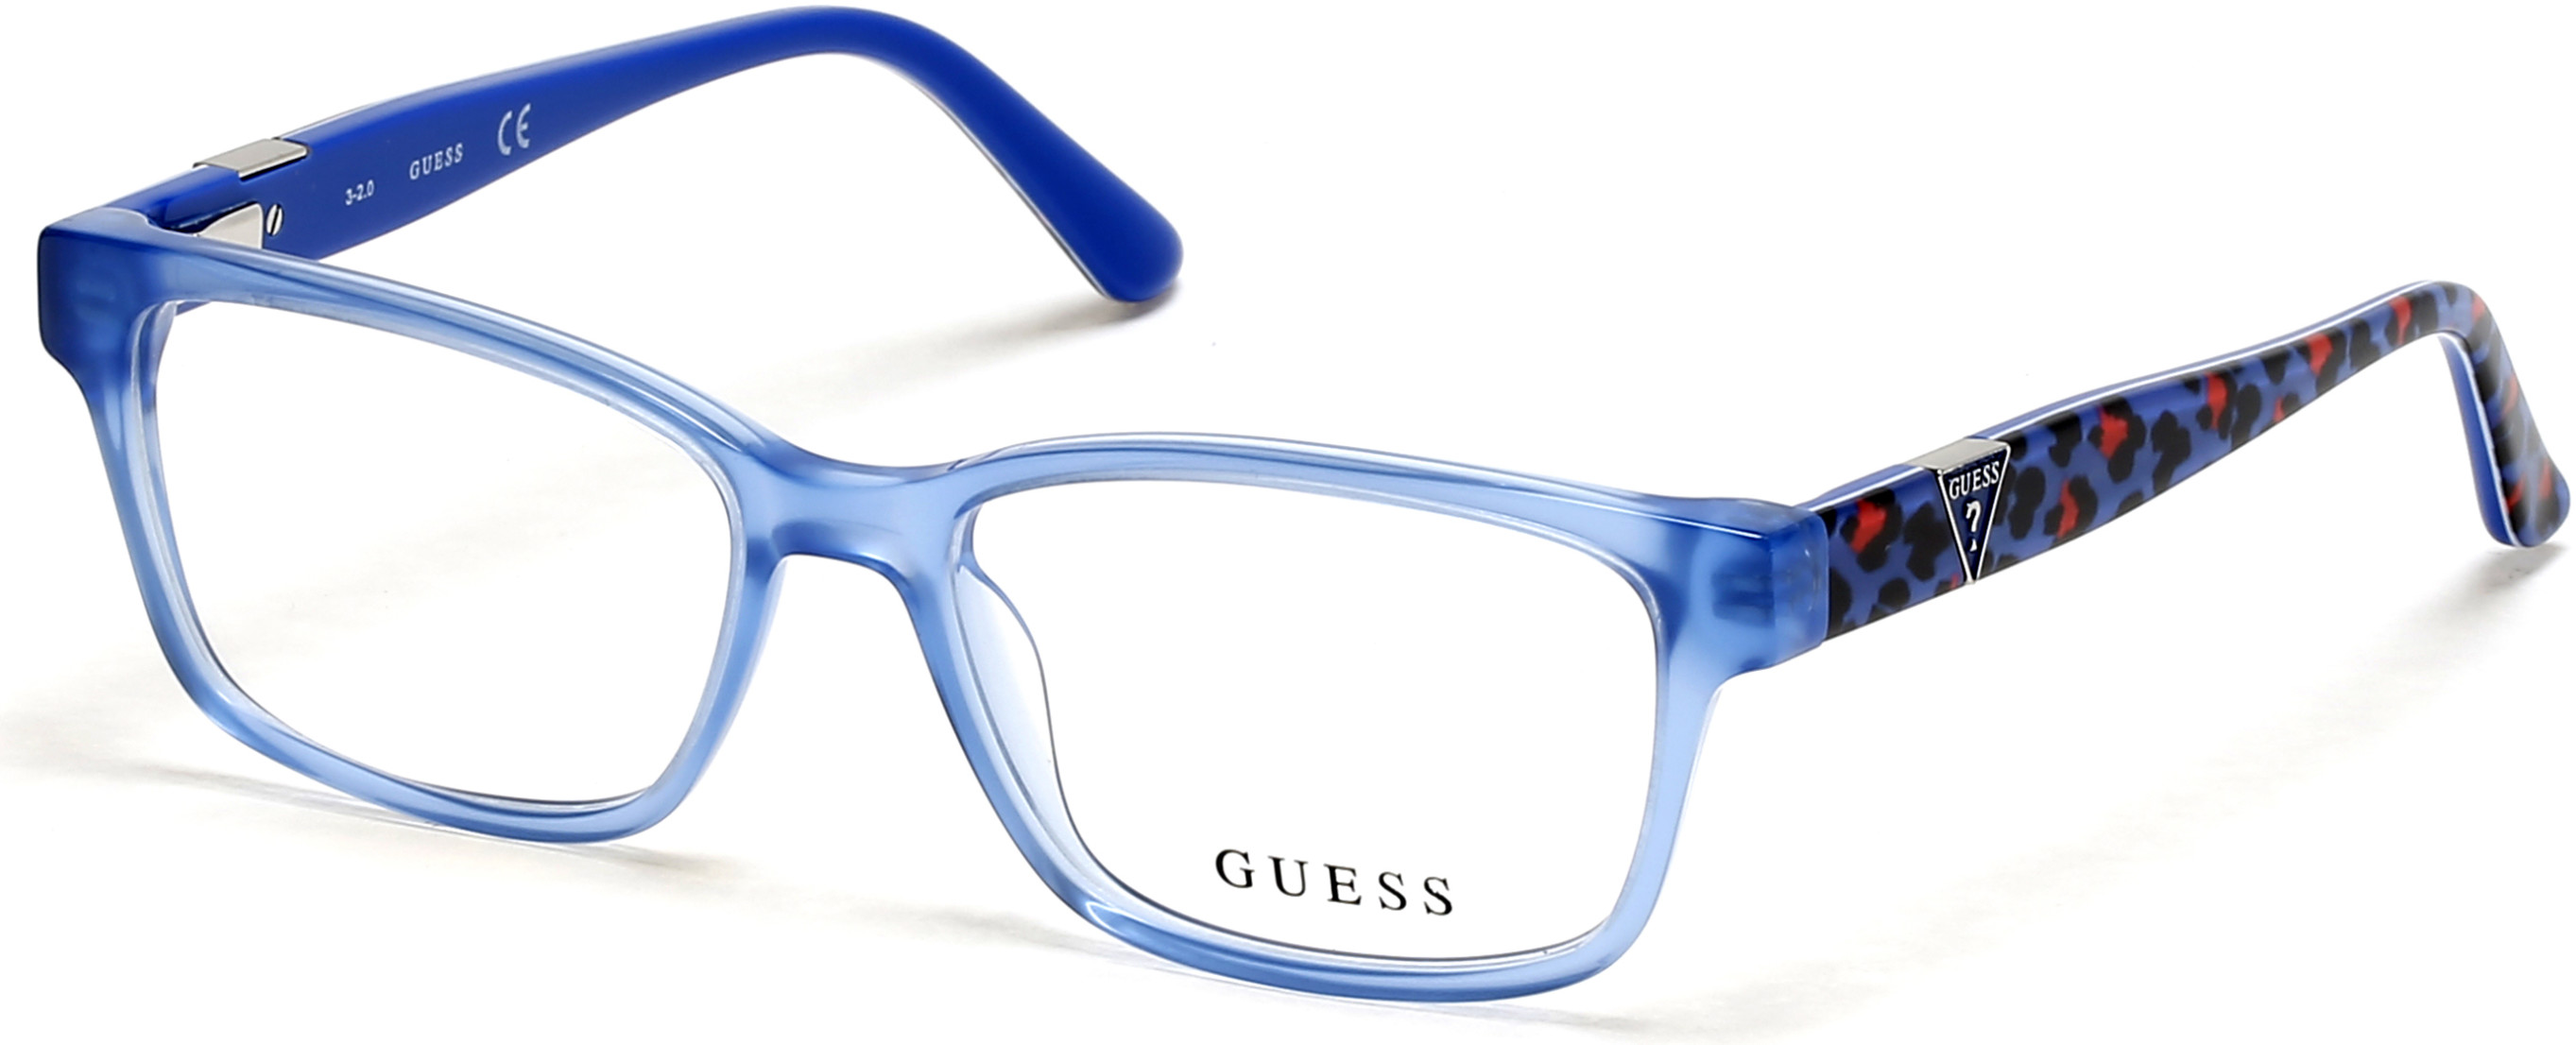 GUESS 9201 090